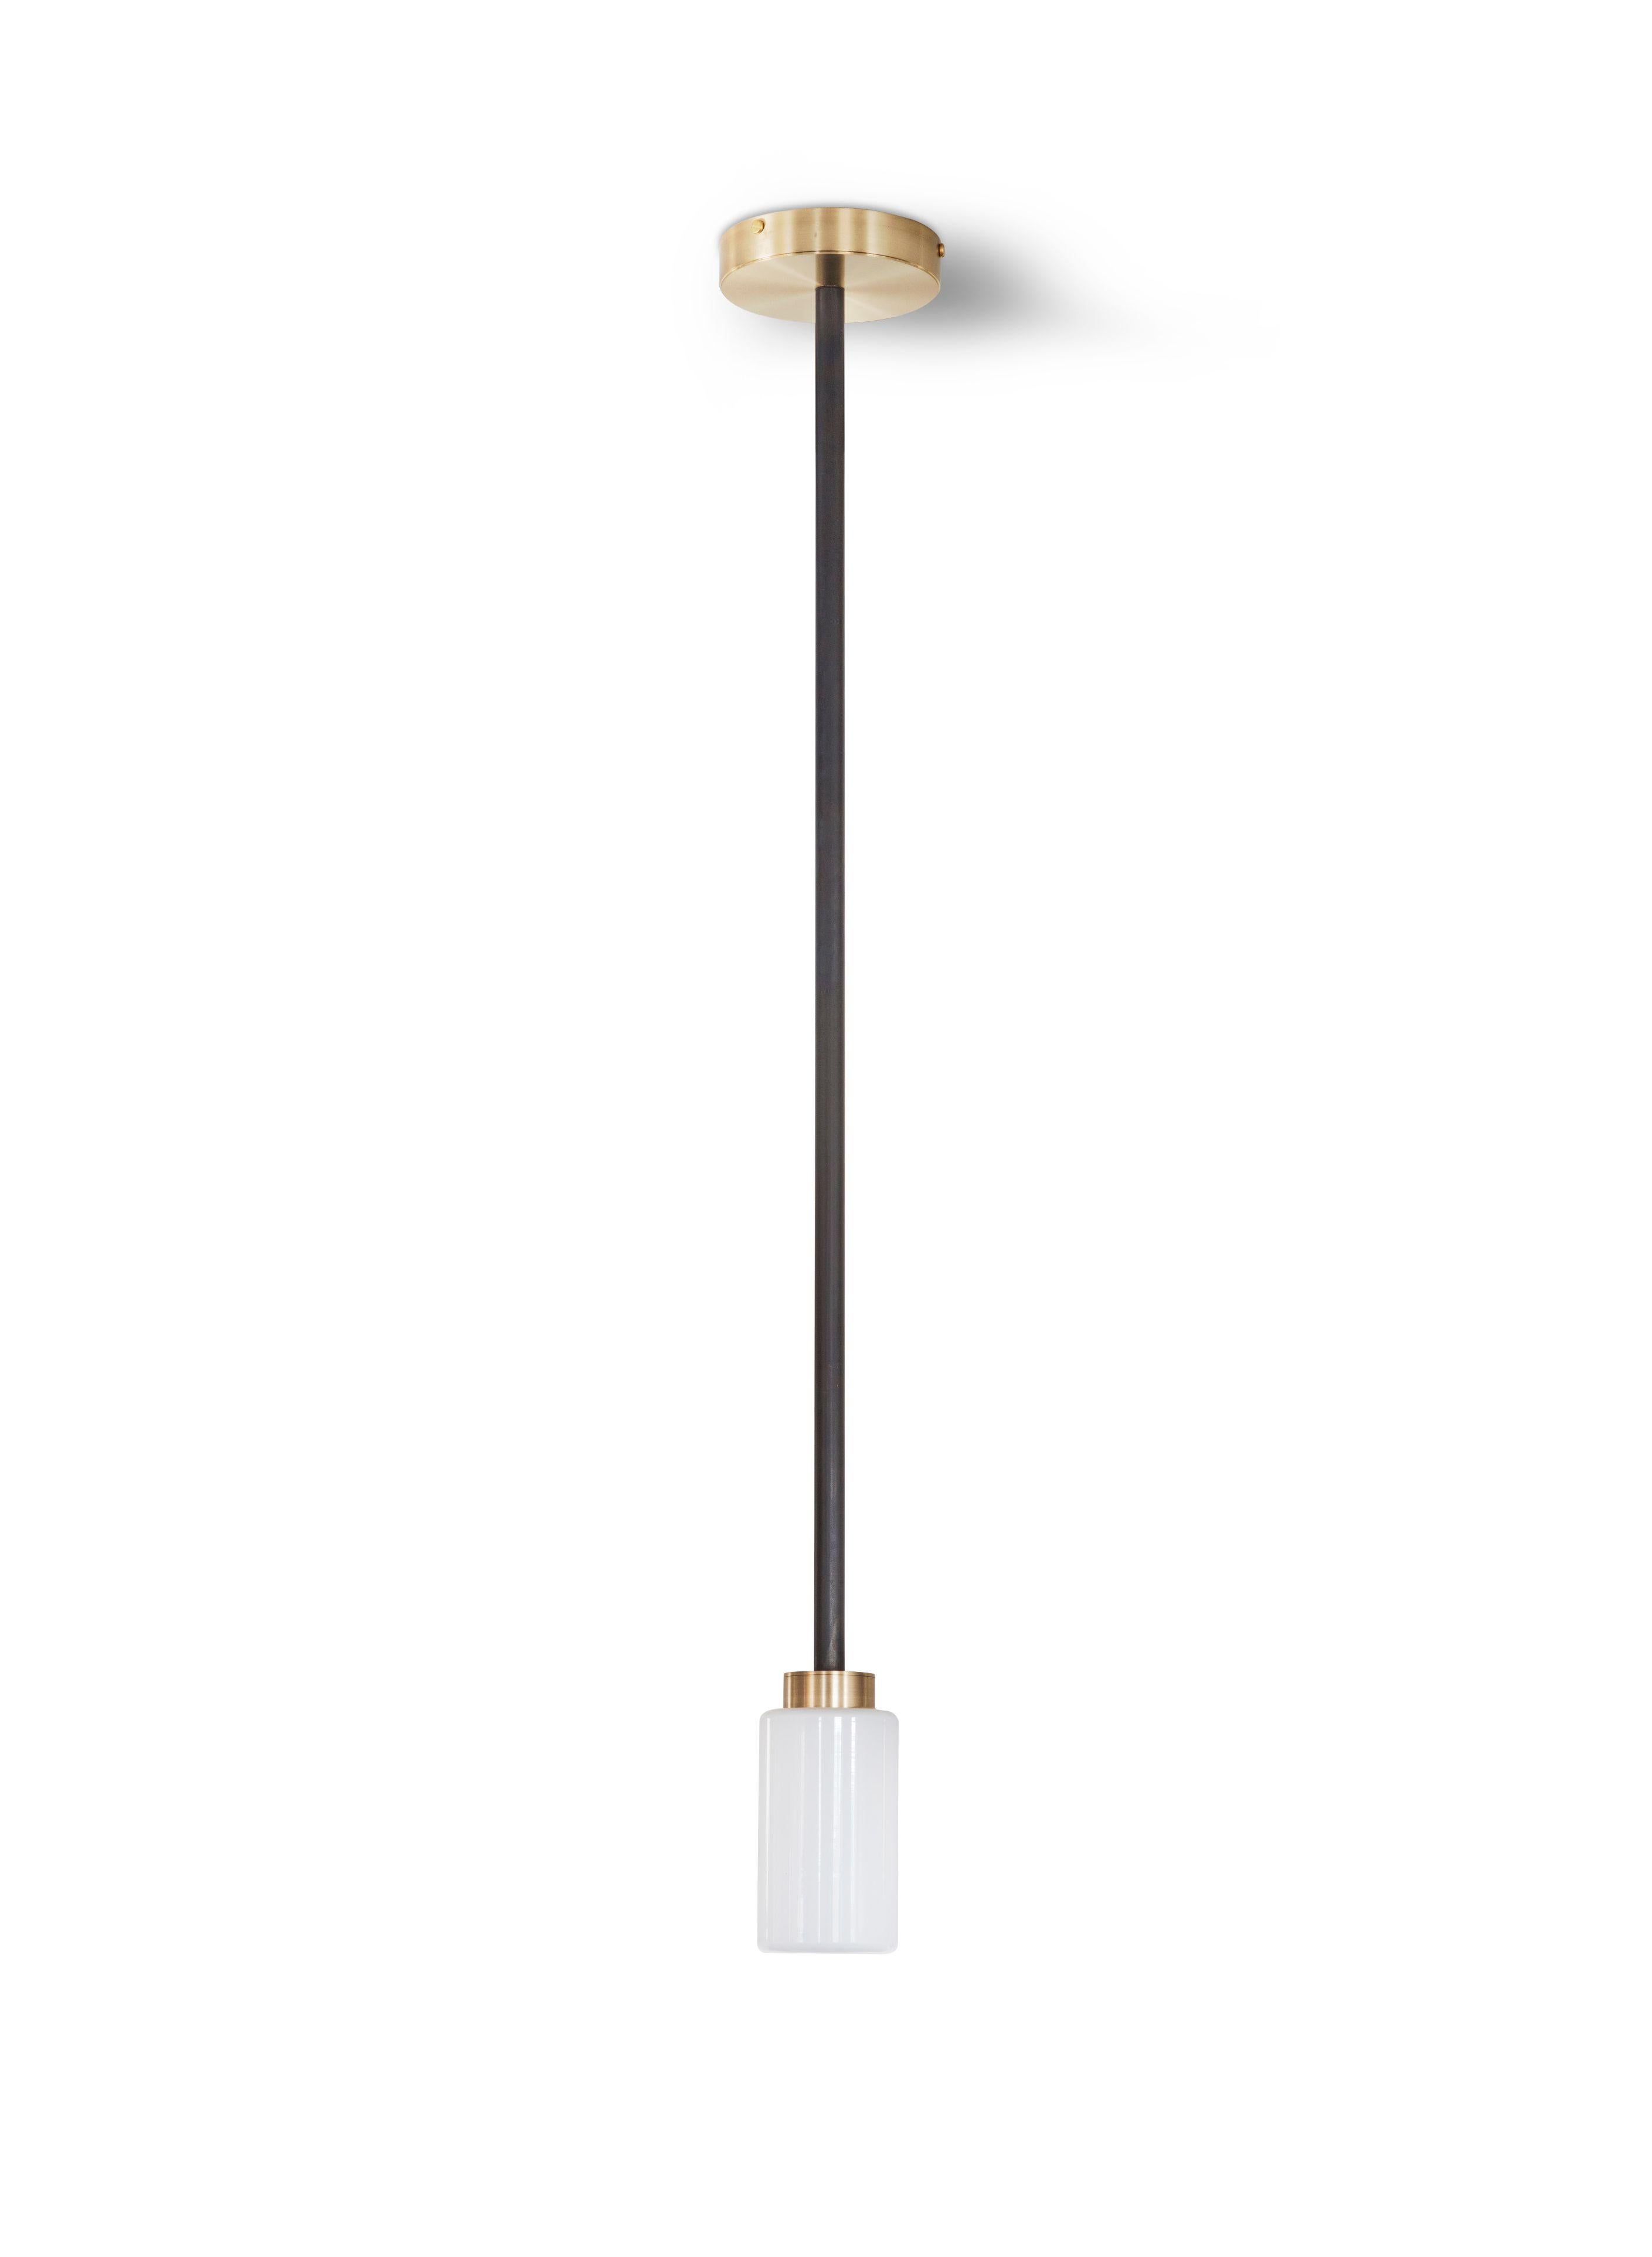 Opal Farol pendant by Bert Frank
Dimensions: H 14 x D 7 cm
Materials: Brass, bronze and opal

Available finishes: Bronzed brass and black brass
All our lamps can be wired according to each country. If sold to the USA it will be wired for the USA for